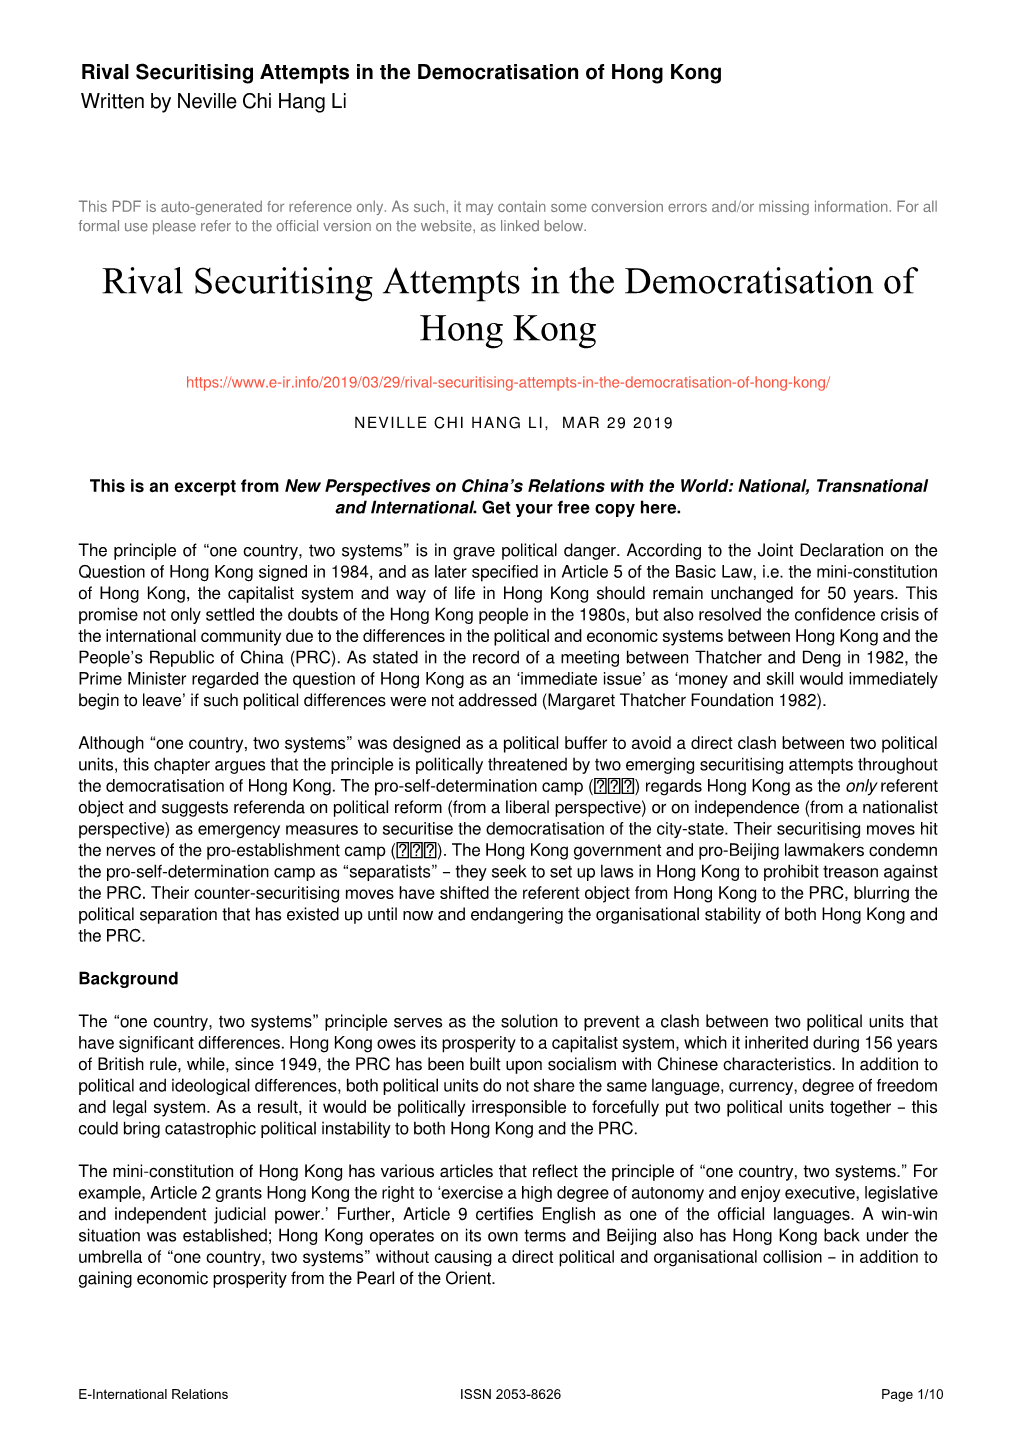 Rival Securitising Attempts in the Democratisation of Hong Kong Written by Neville Chi Hang Li